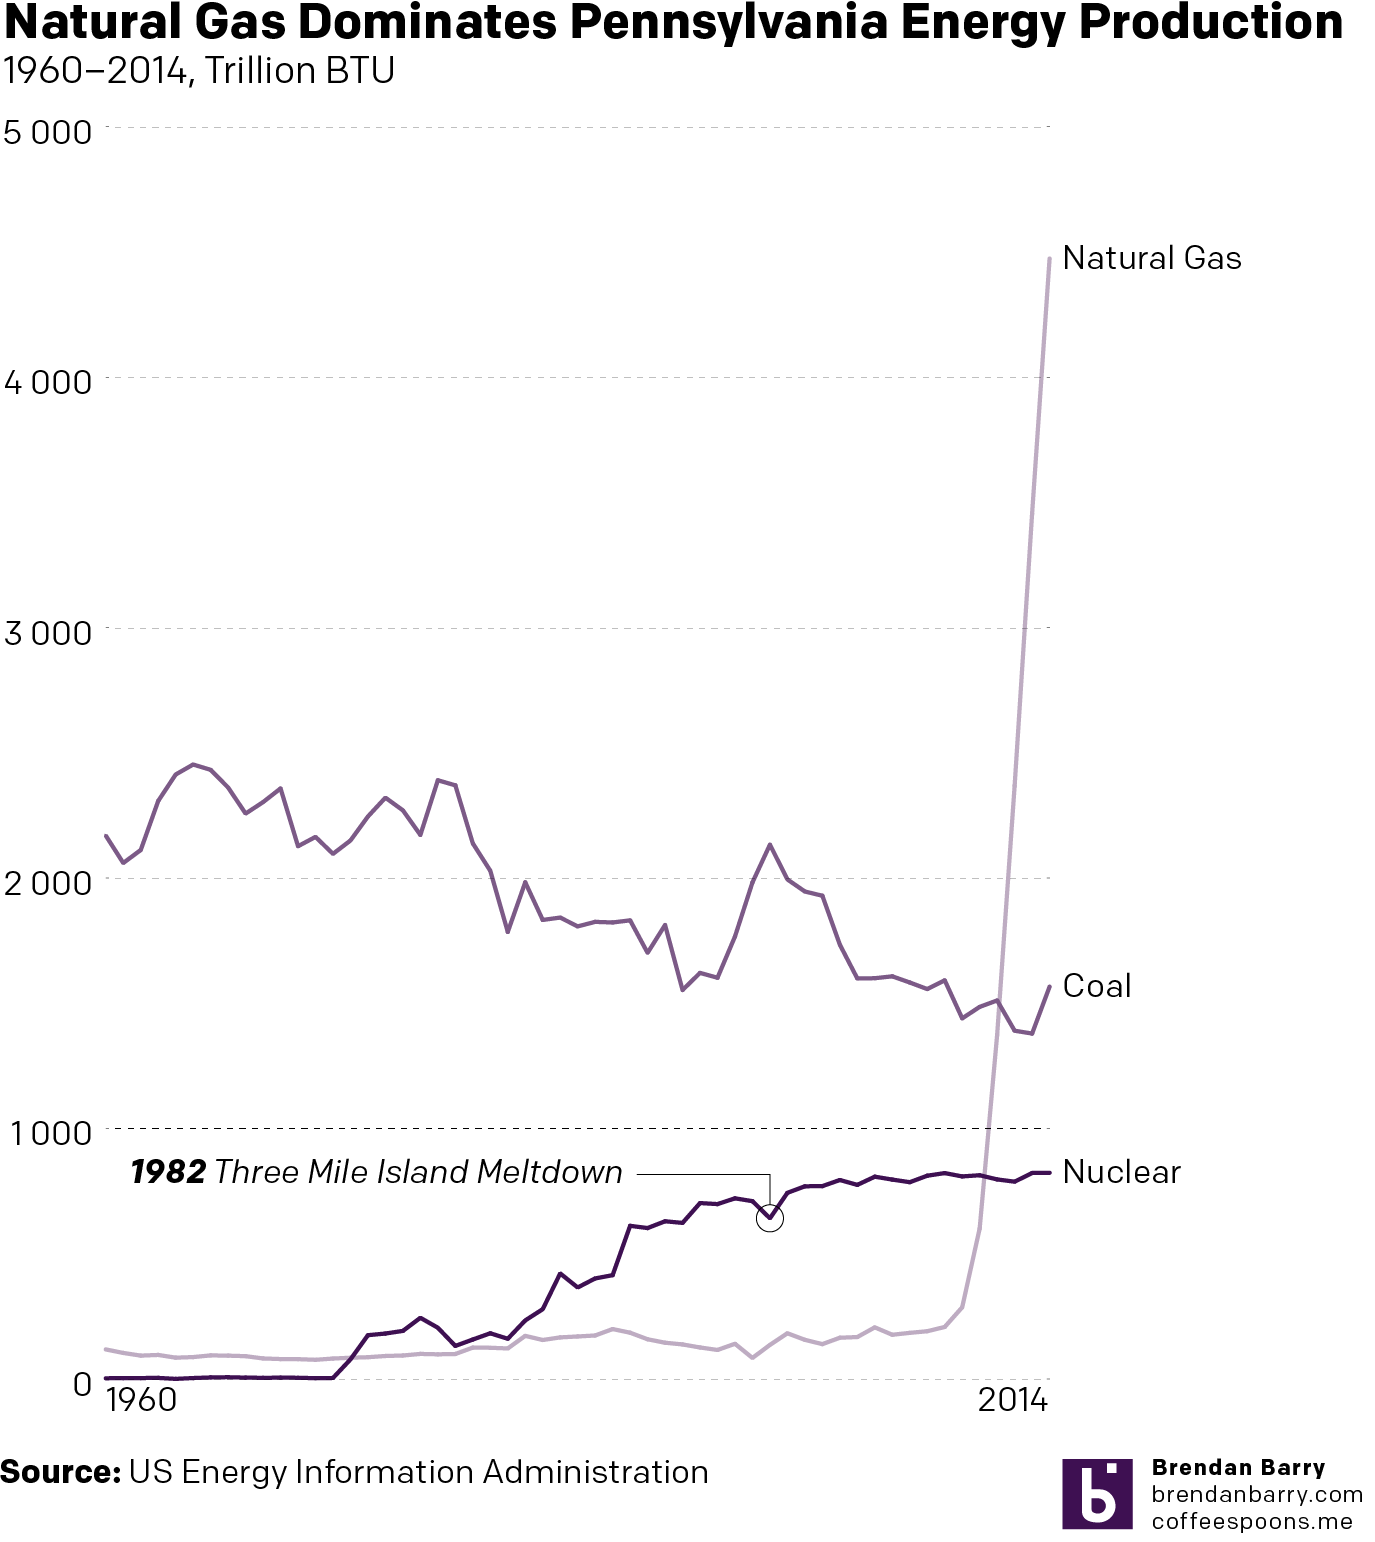 The rise of Marcellus Shale natural gas has been quick and dramatic